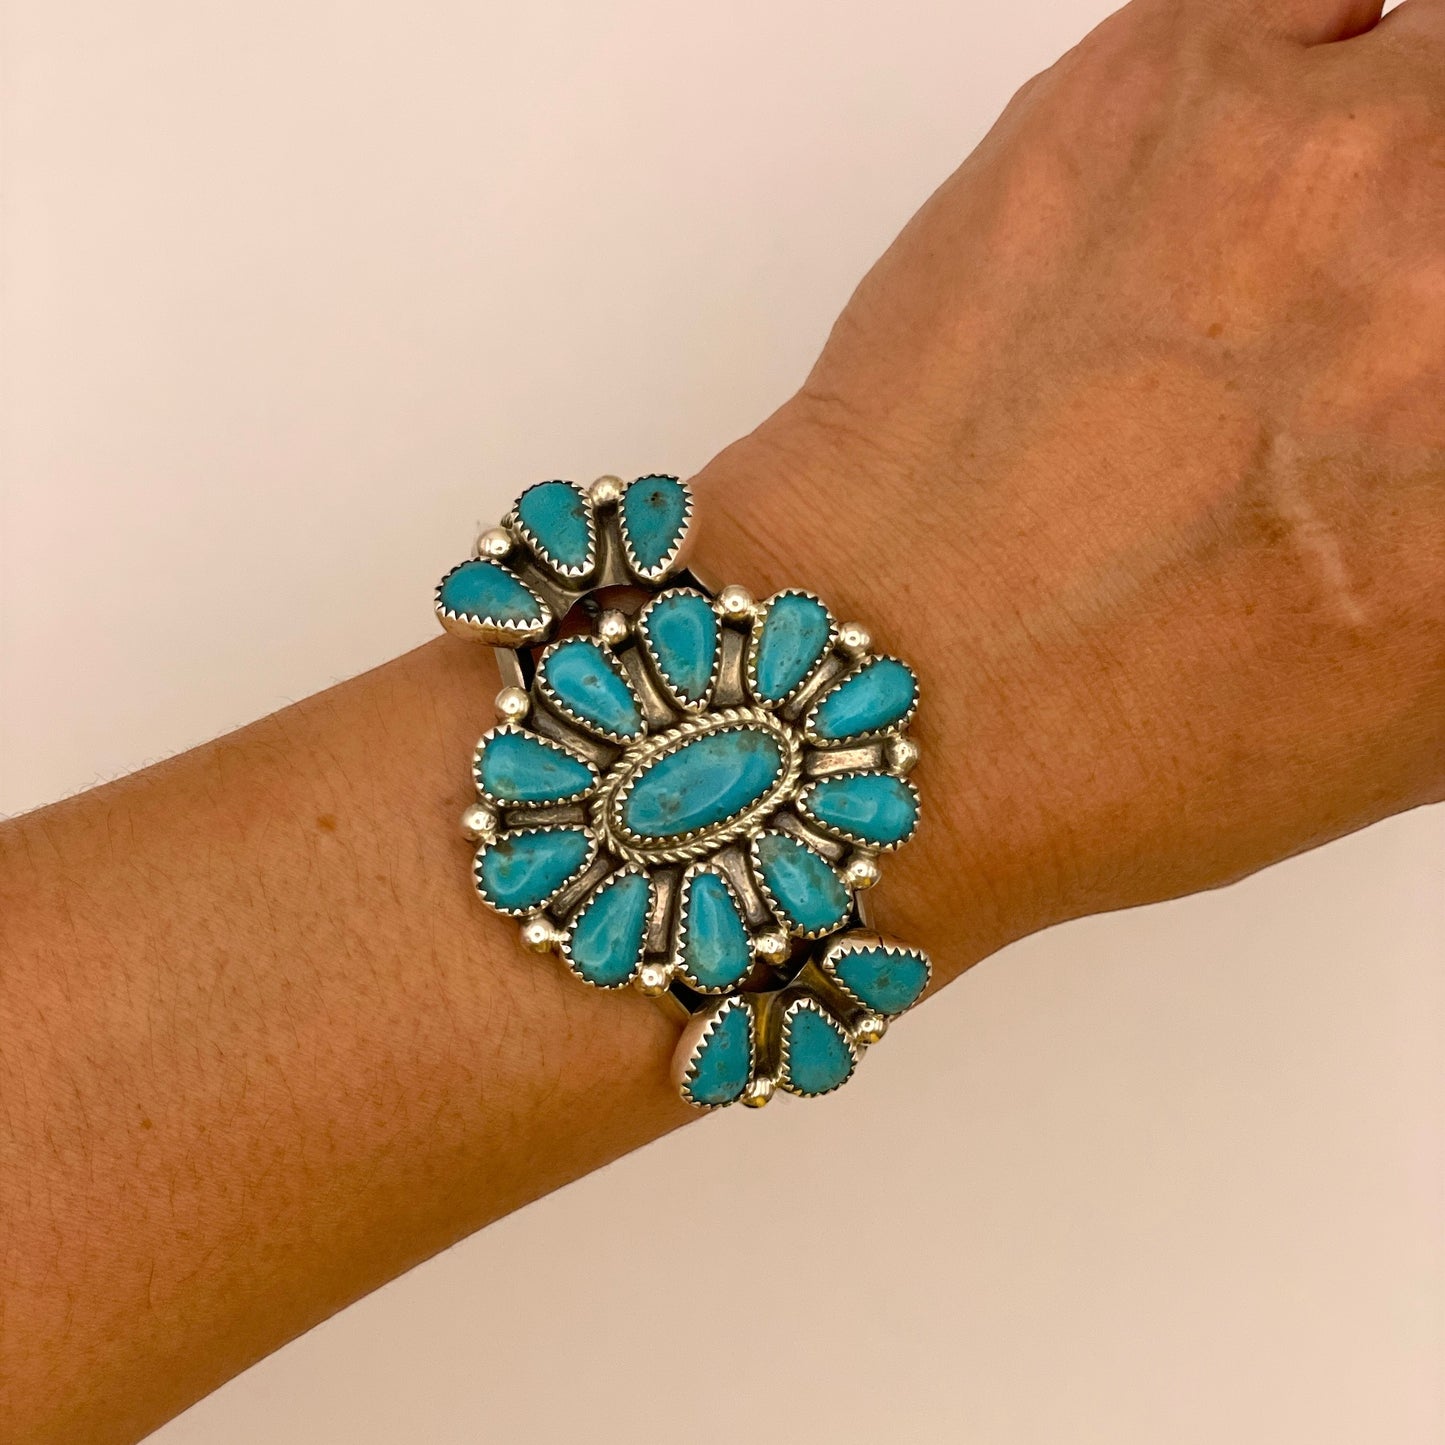 Kingman Turquoise Cluster Cuff Bracelet By Mike & Evelyn Platero Size 5.11" (5-1/8")